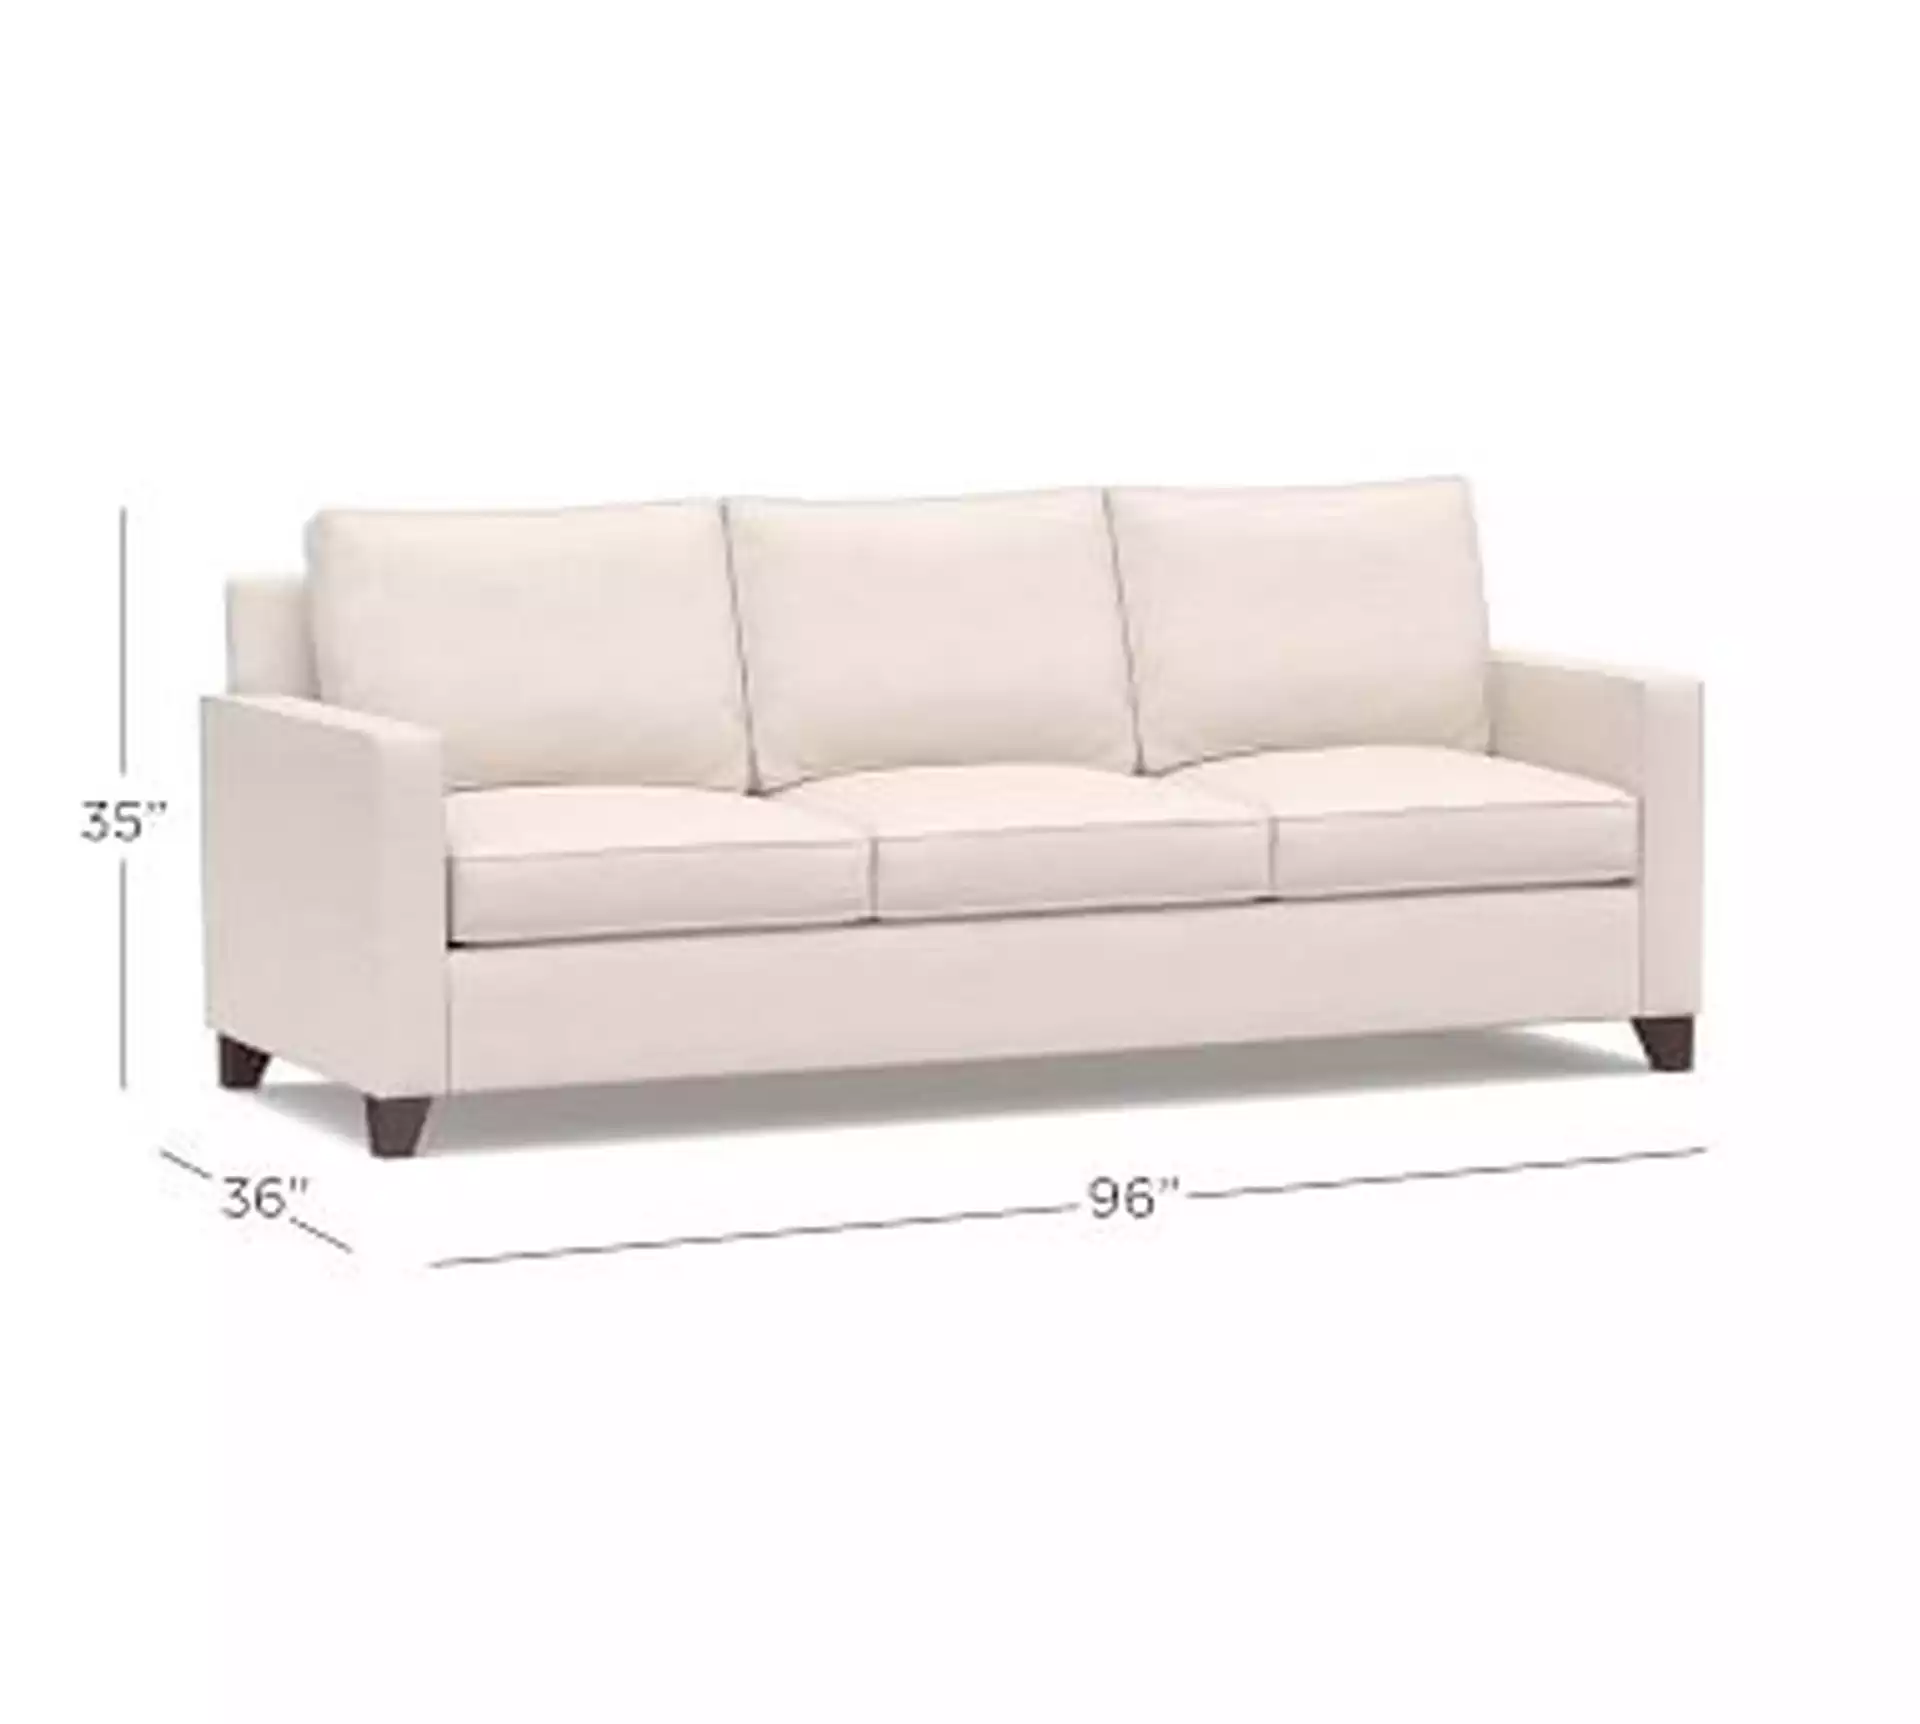 Cameron Square Arm Upholstered Sofa 86", Polyester Wrapped Cushions, Performance Chateau Basketweave Ivory